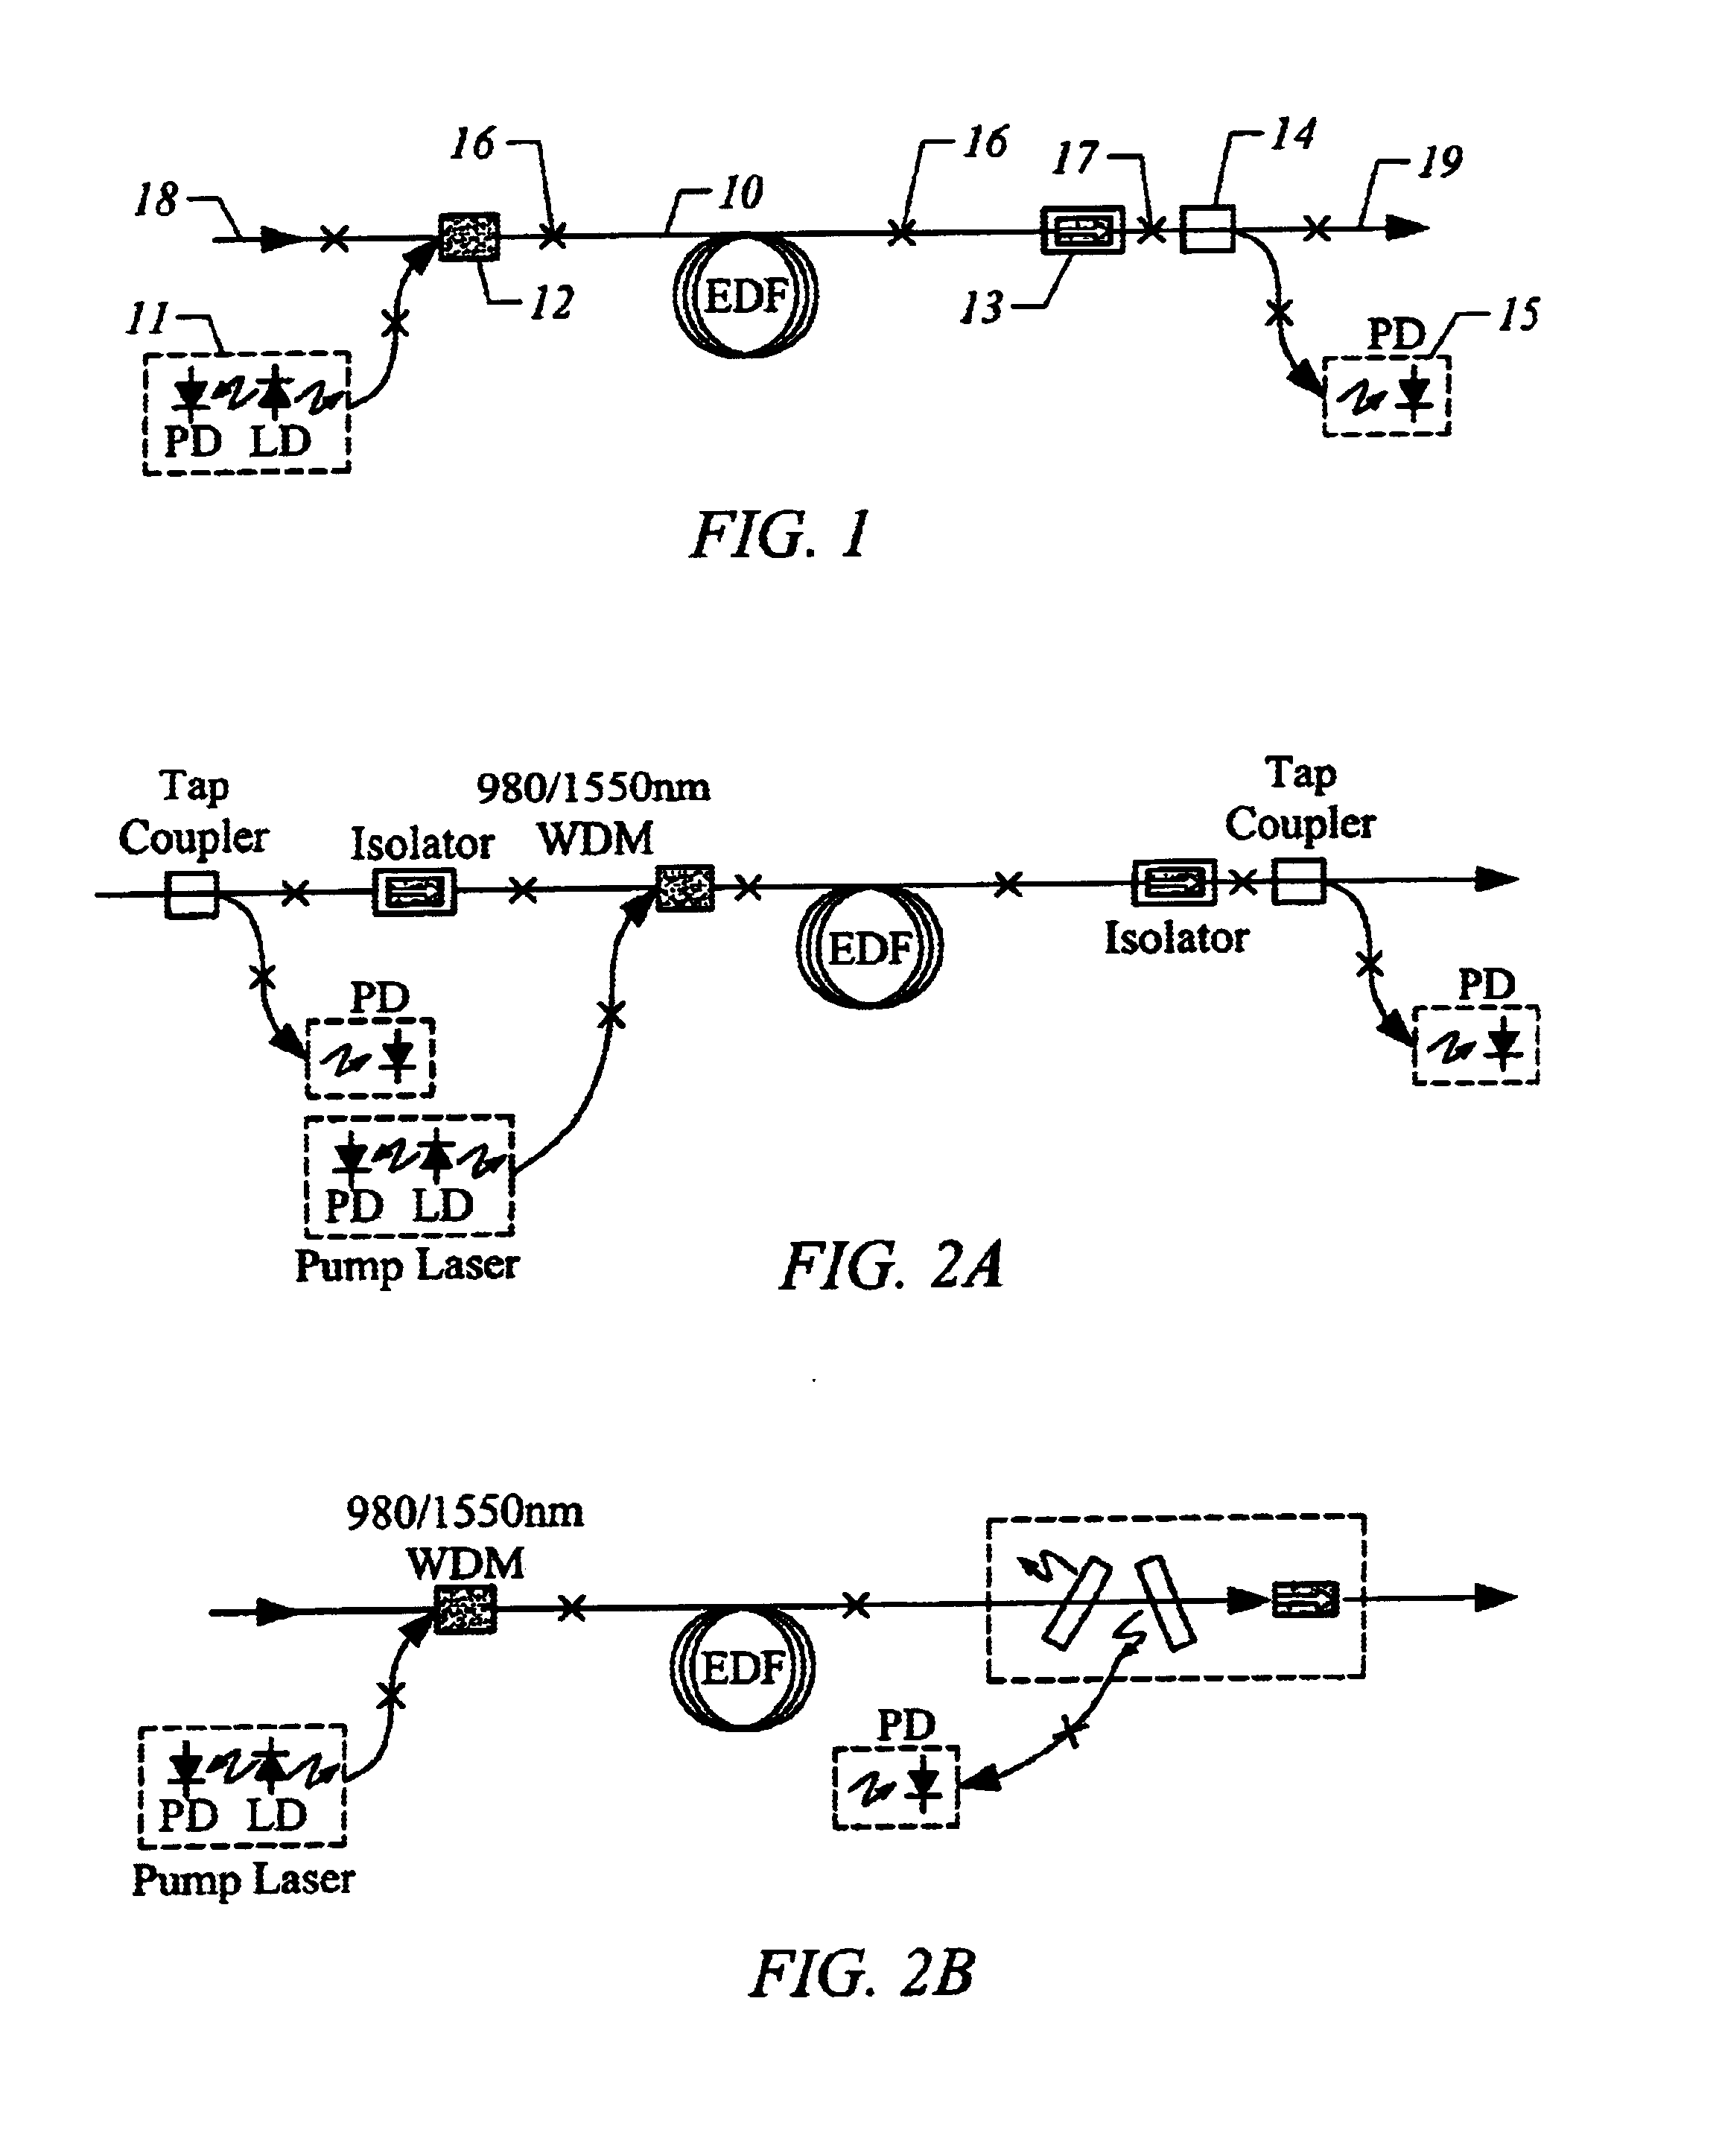 Erbium-doped fiber amplifier and integrated module components